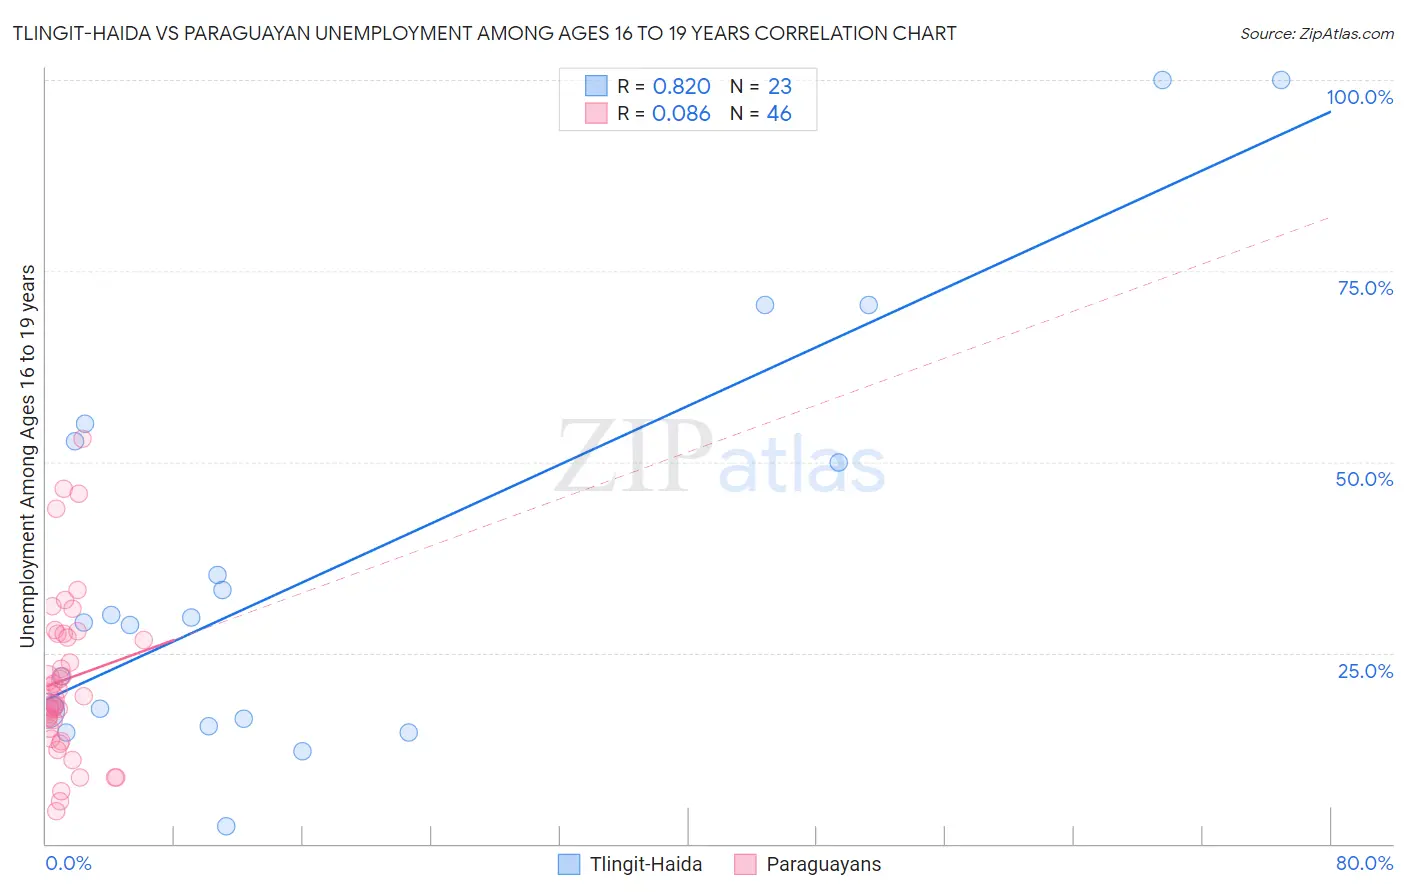 Tlingit-Haida vs Paraguayan Unemployment Among Ages 16 to 19 years